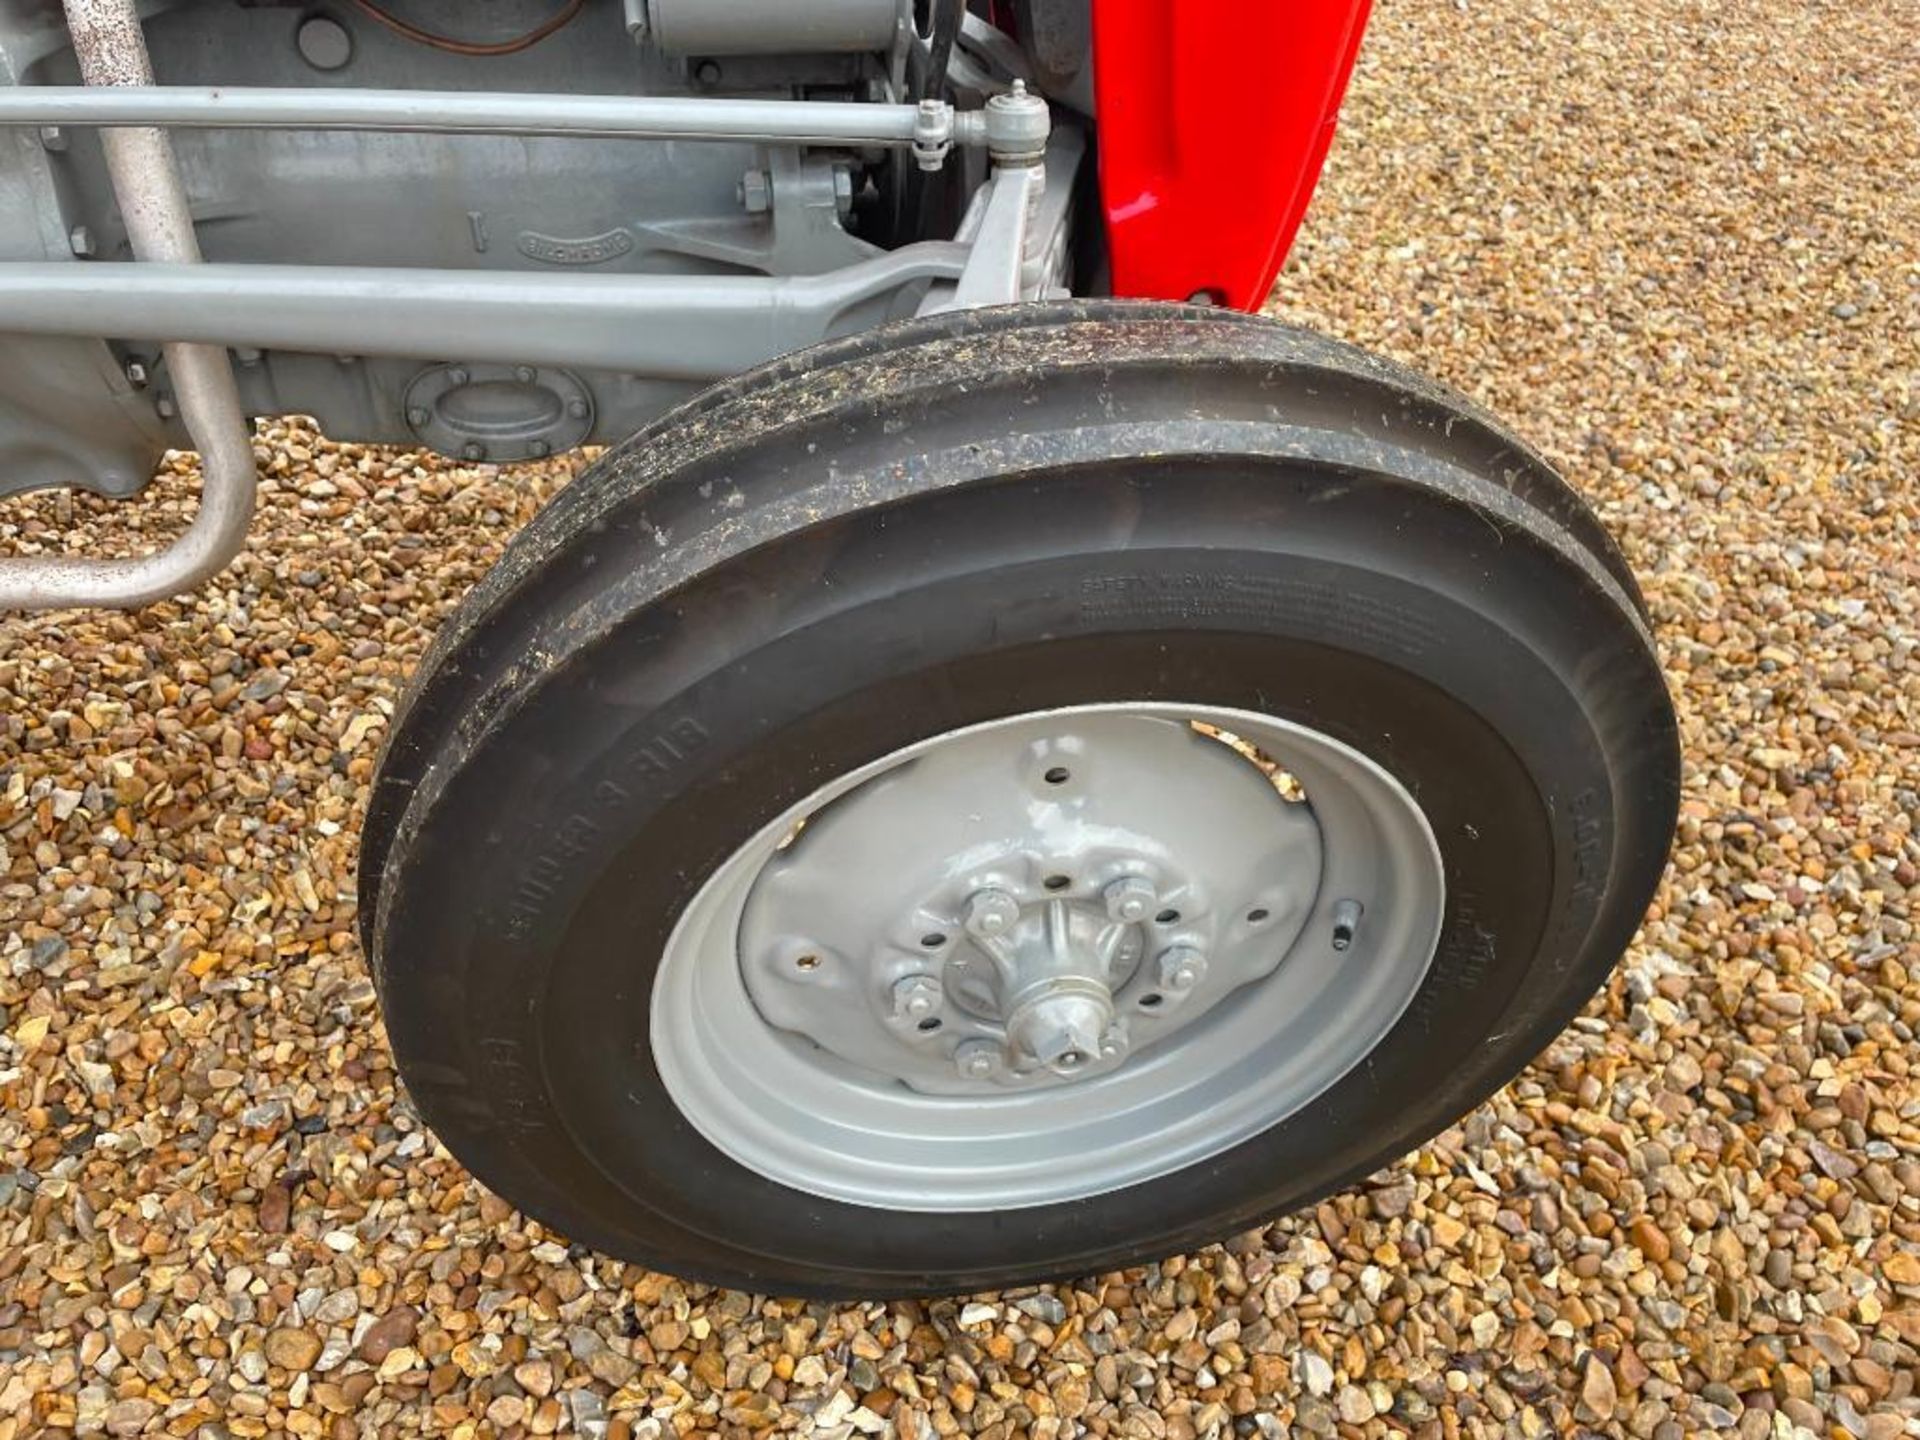 1962 Massey Ferguson 35 Industrial petrol 2wd tractor on 6.00-16 front and 10.00-28IND rear wheels a - Image 18 of 19